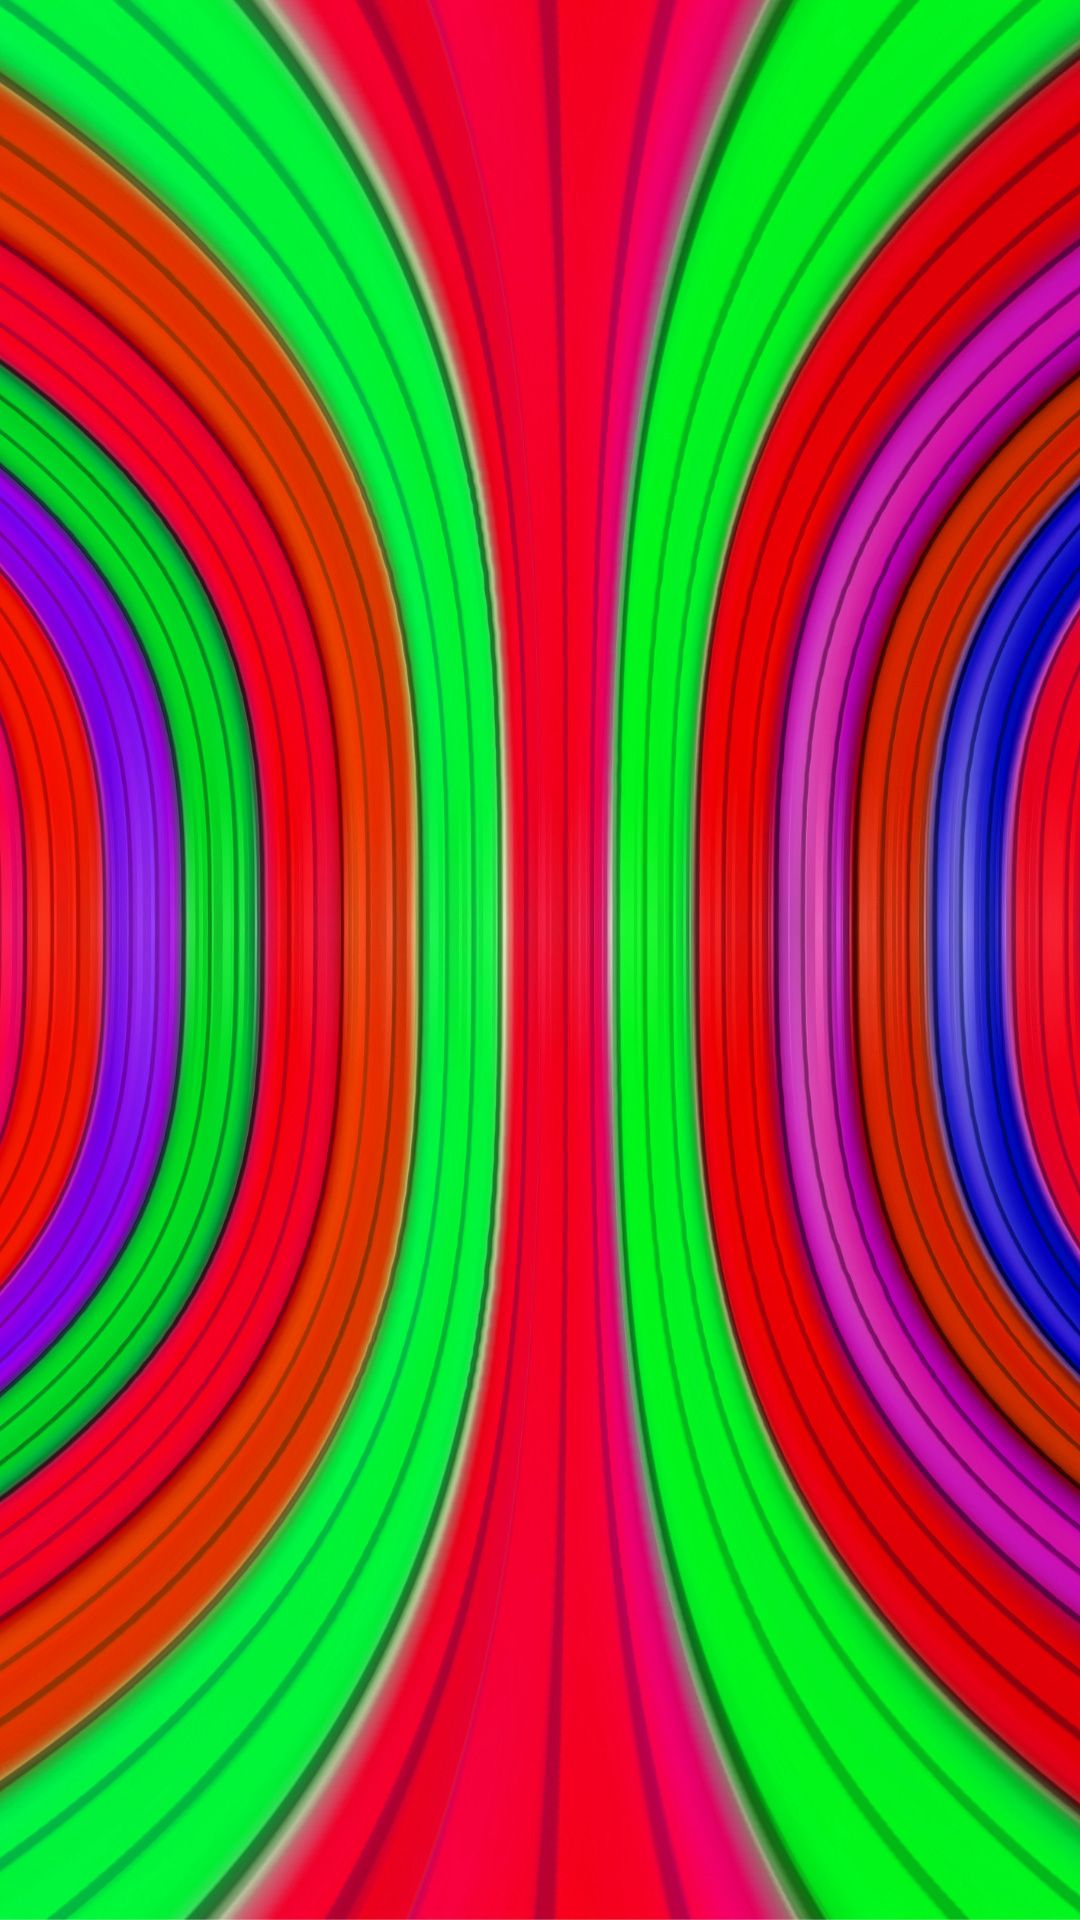 A digital image of a series of concentric circles in red, blue, green and pink. - Indie